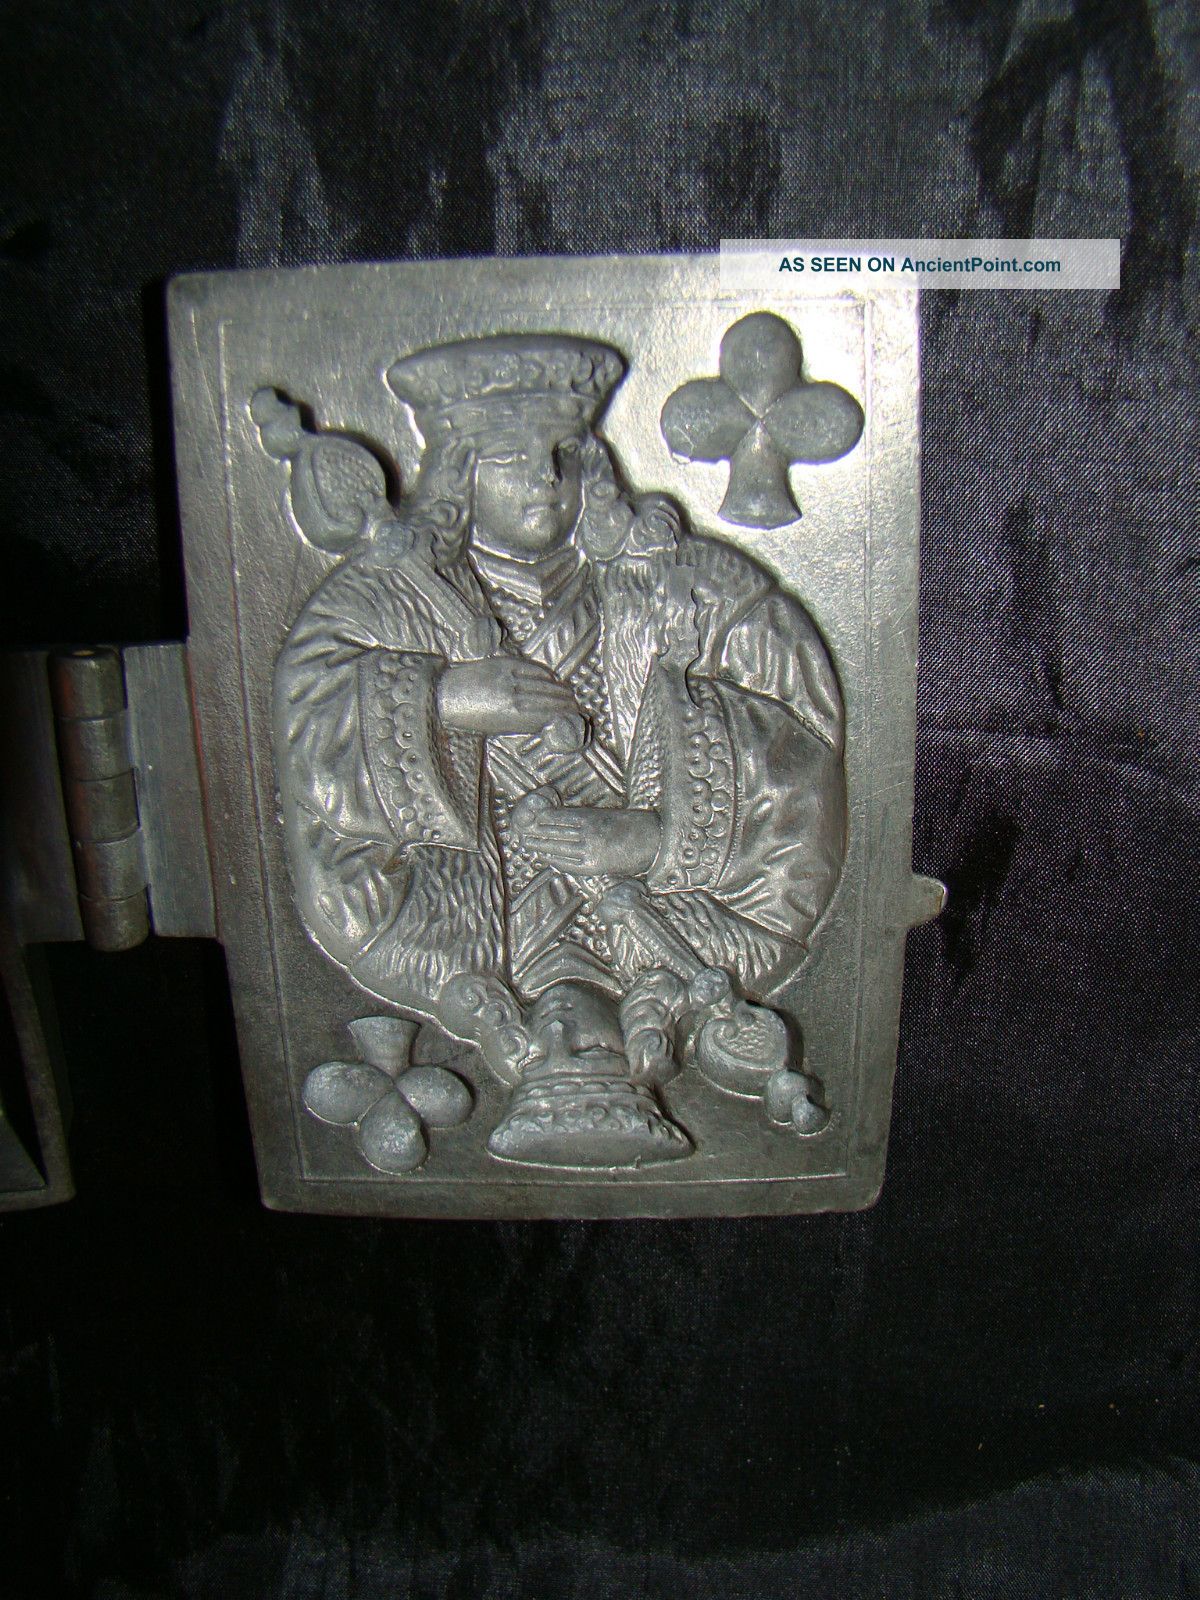  - antique_pewter_king_of_clubs_chocolate_or_ice_cream_mold_3_lgw